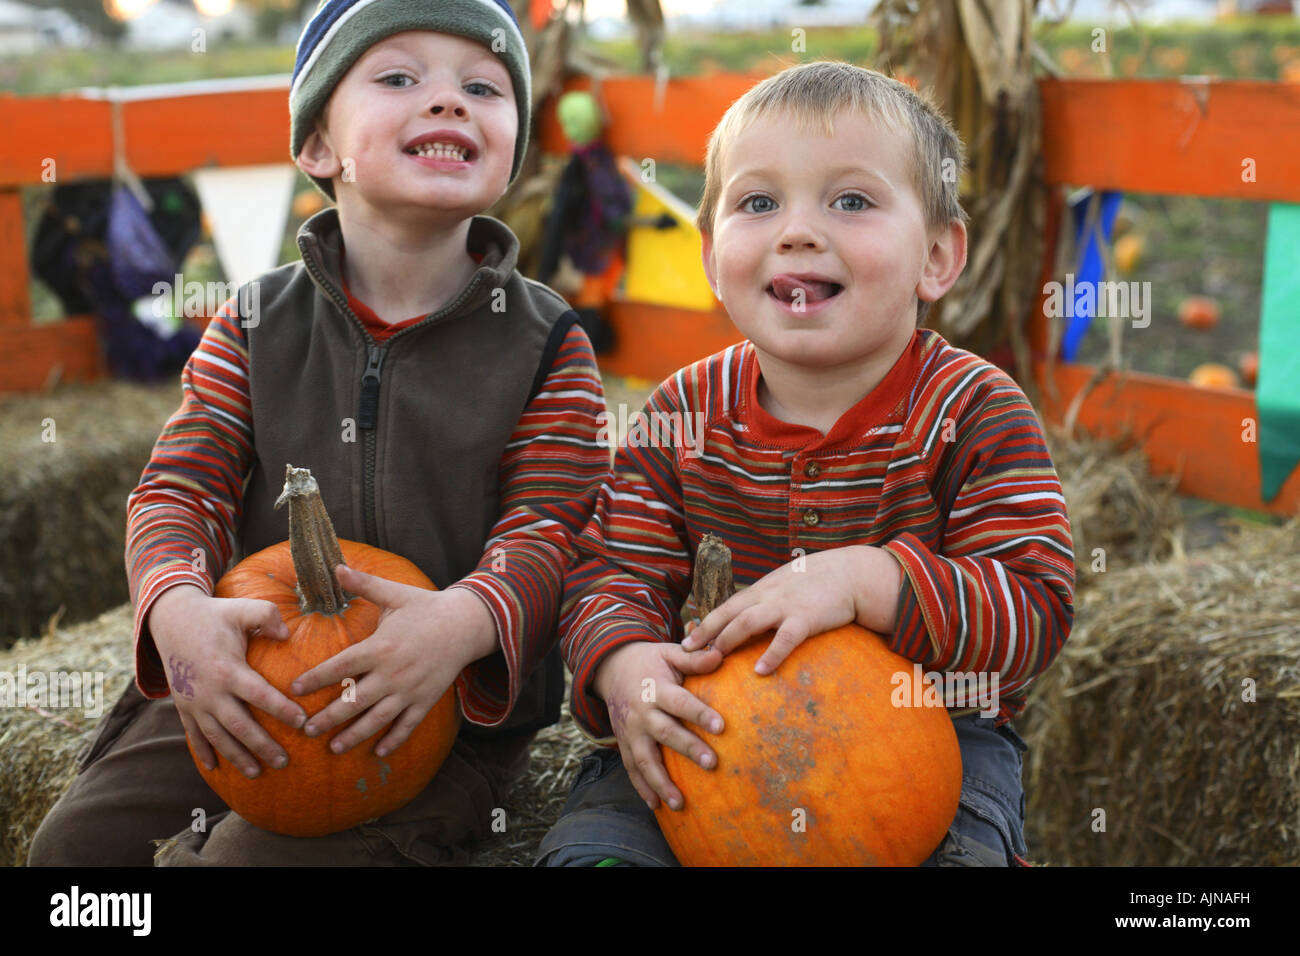 Two young boys with pumpkins Stock Photo